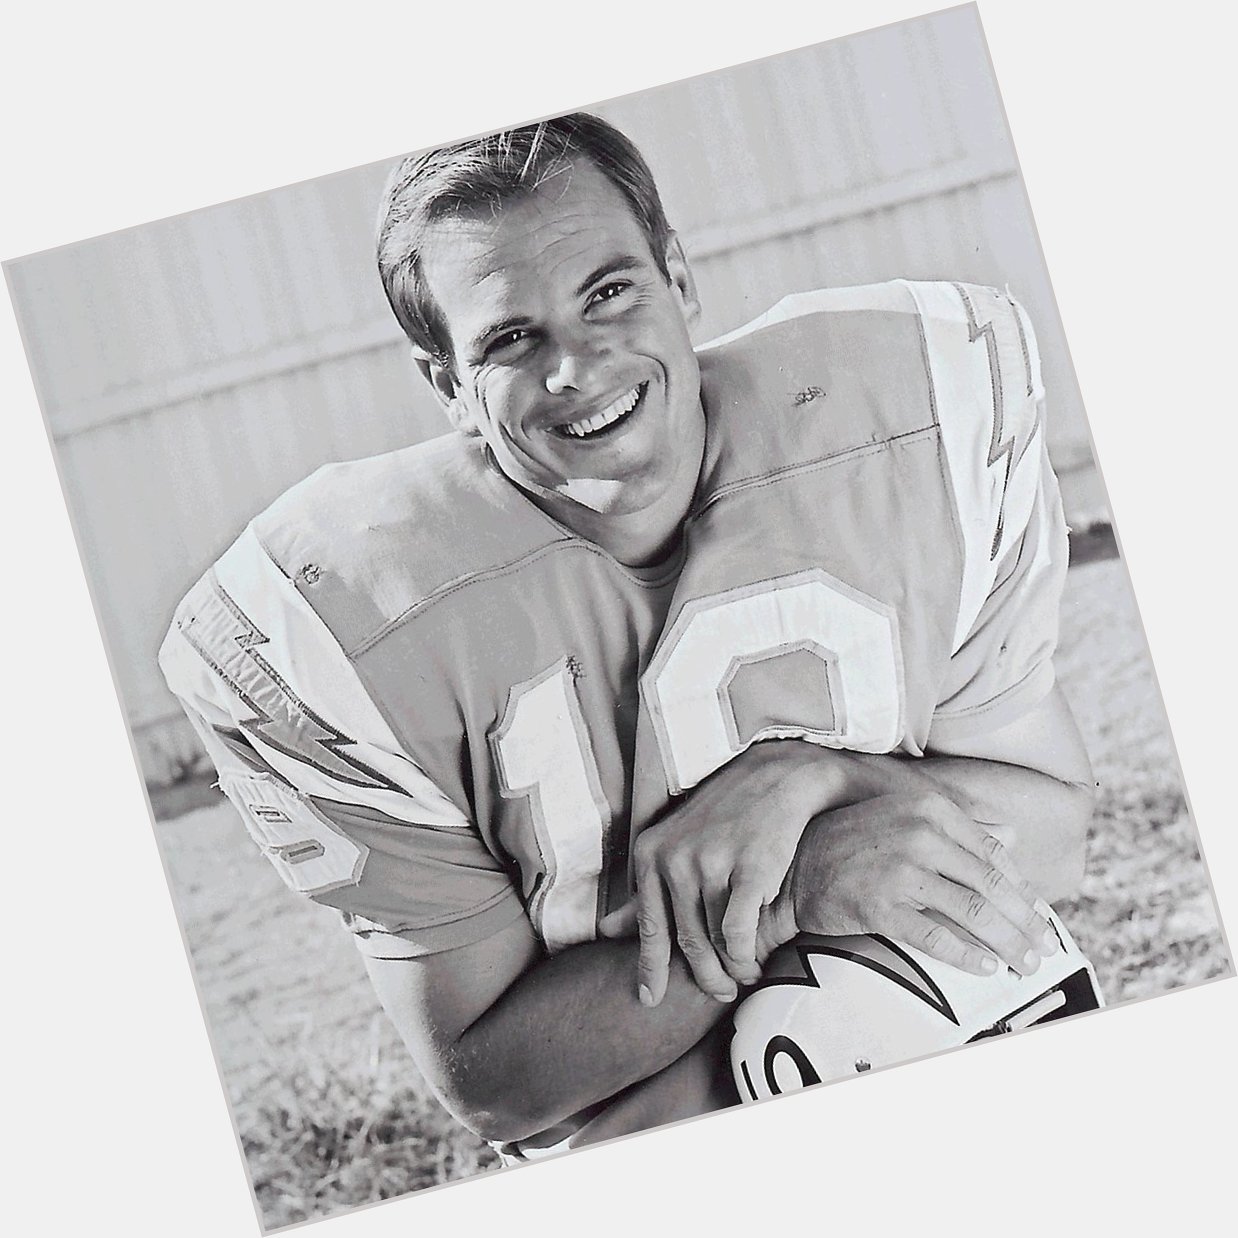  forever. 

Happy Birthday to great Lance Alworth! 